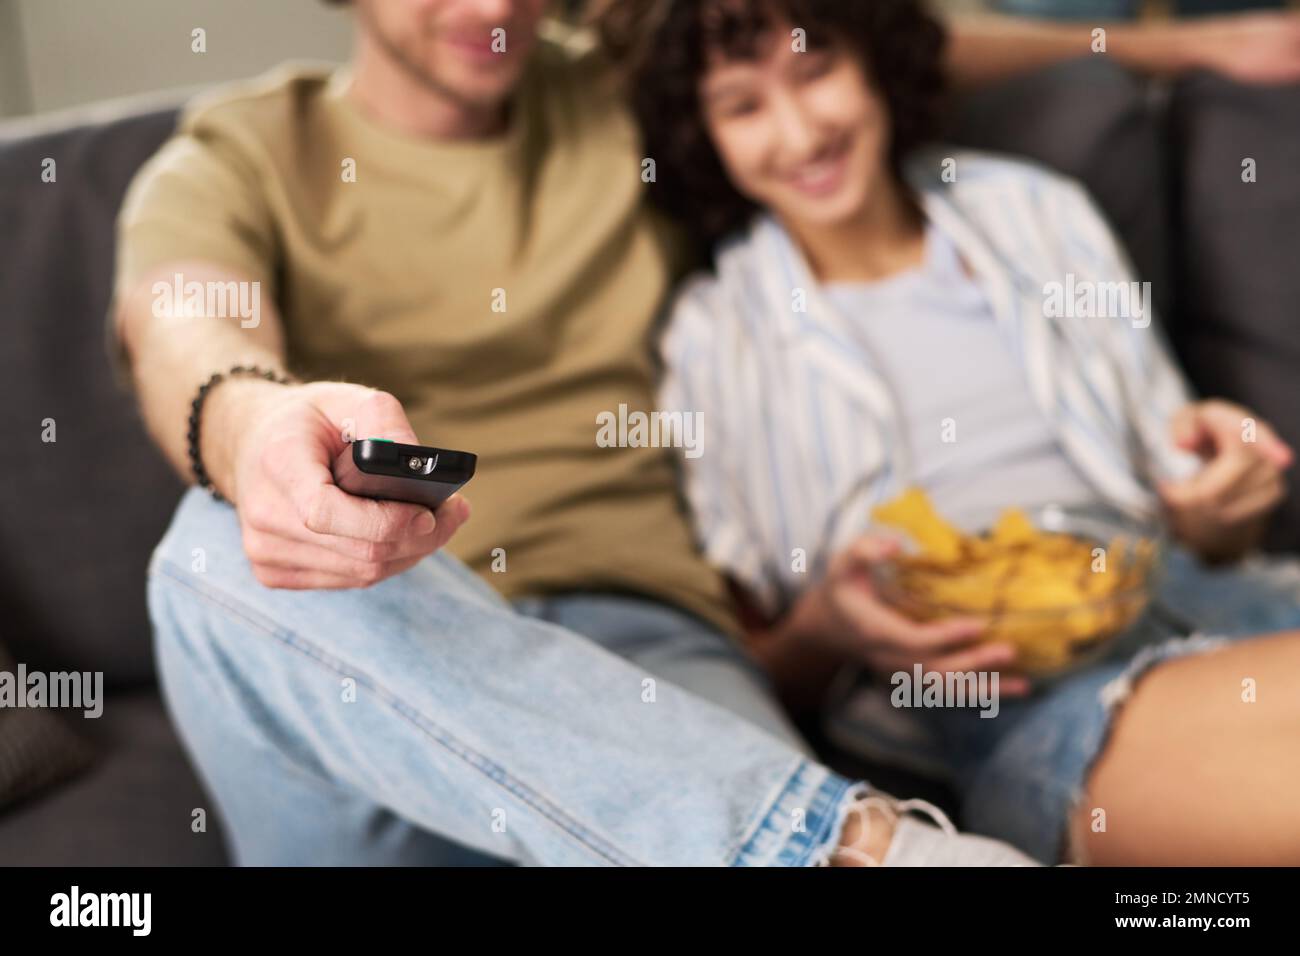 Focus on hand of young restful man holding remote control while sitting next to his wife with potato chips and choosing tv channel Stock Photo